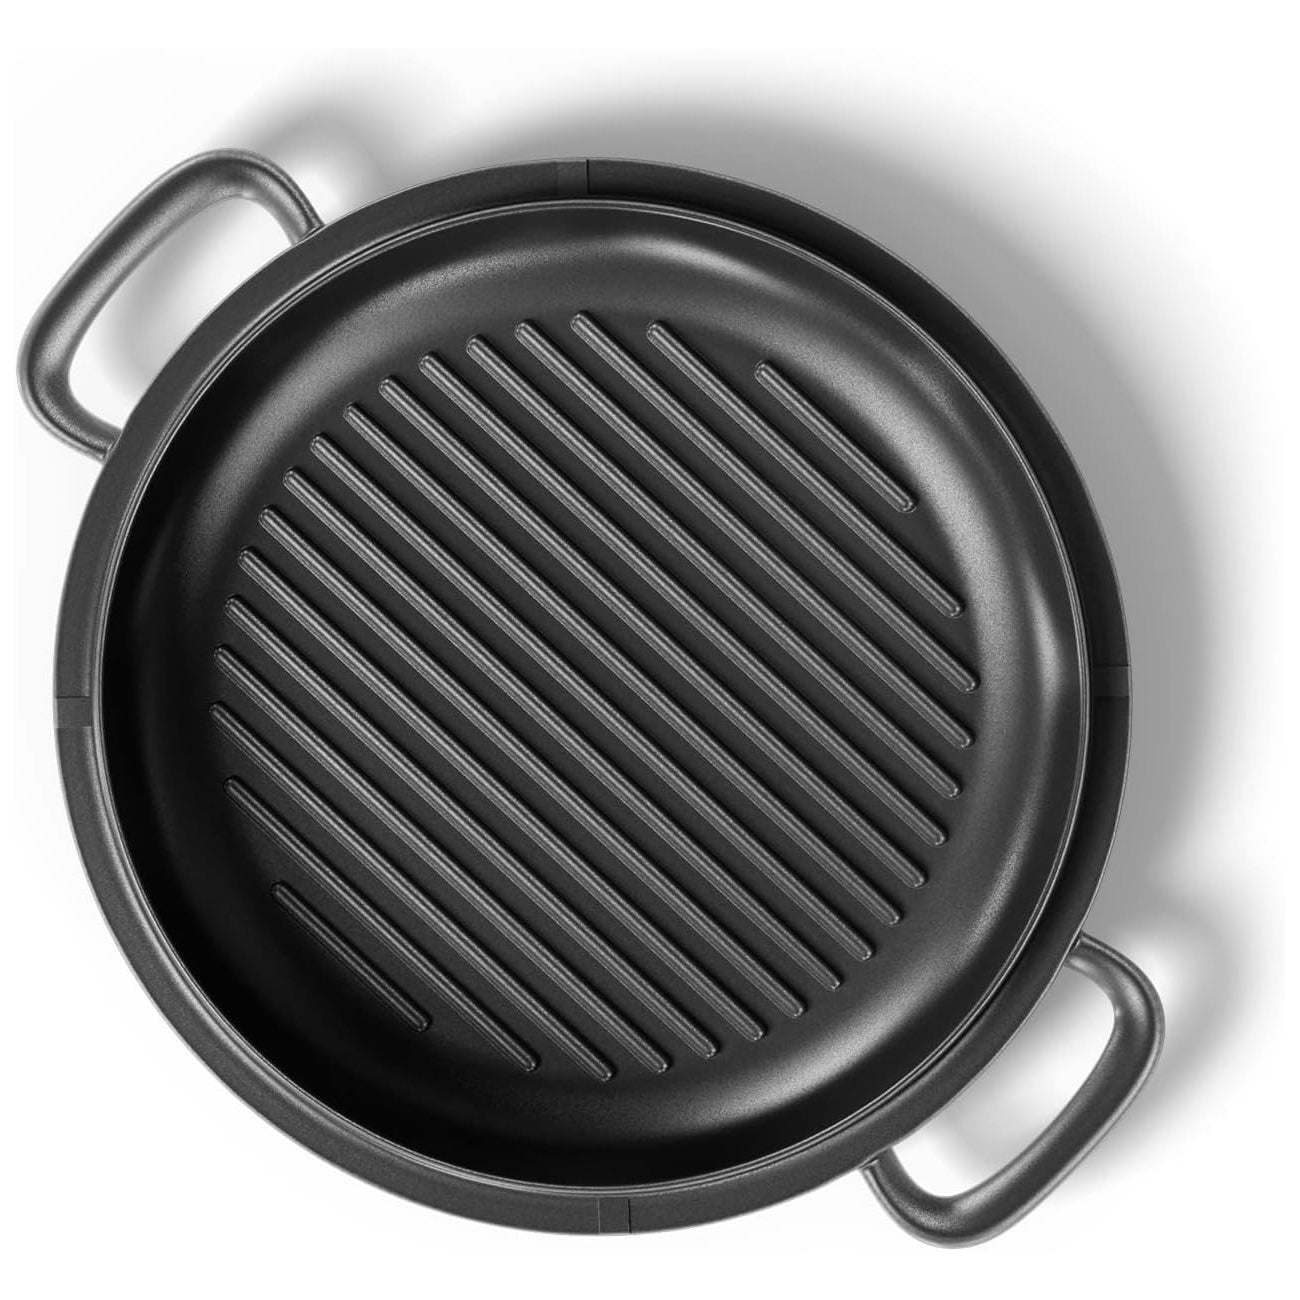 Grill Pan And Soup Pot Lid, Cast Iron, Black – Nonstick For Stovetop, Oven